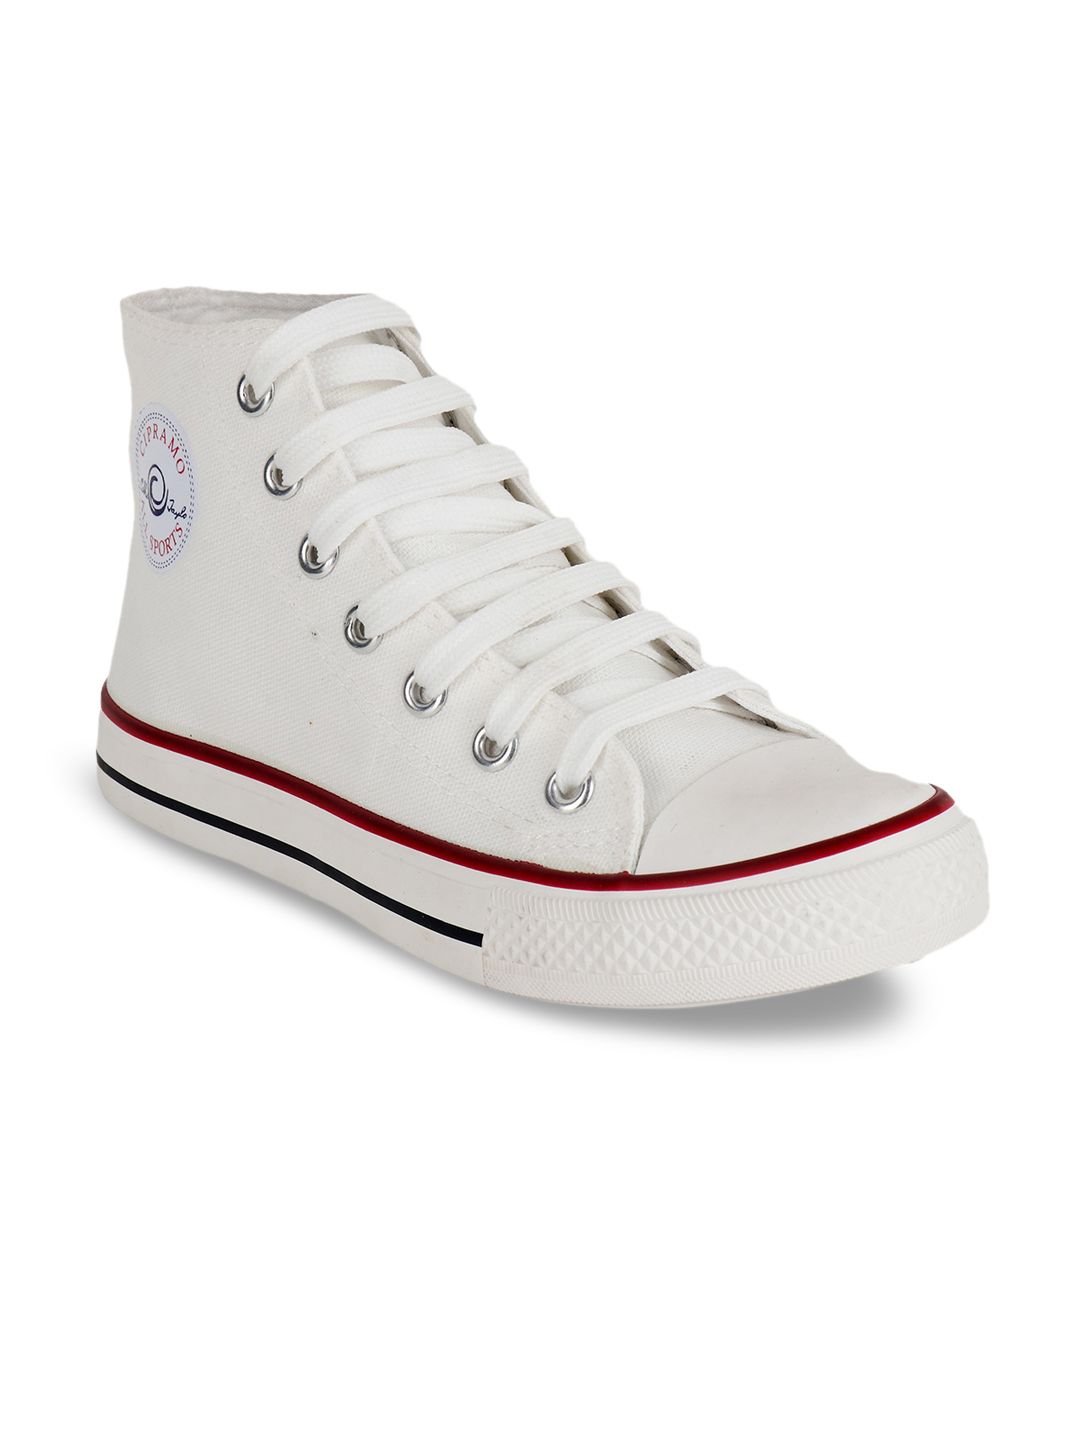 CIPRAMO SPORTS Women White High-Top Sneakers Price in India